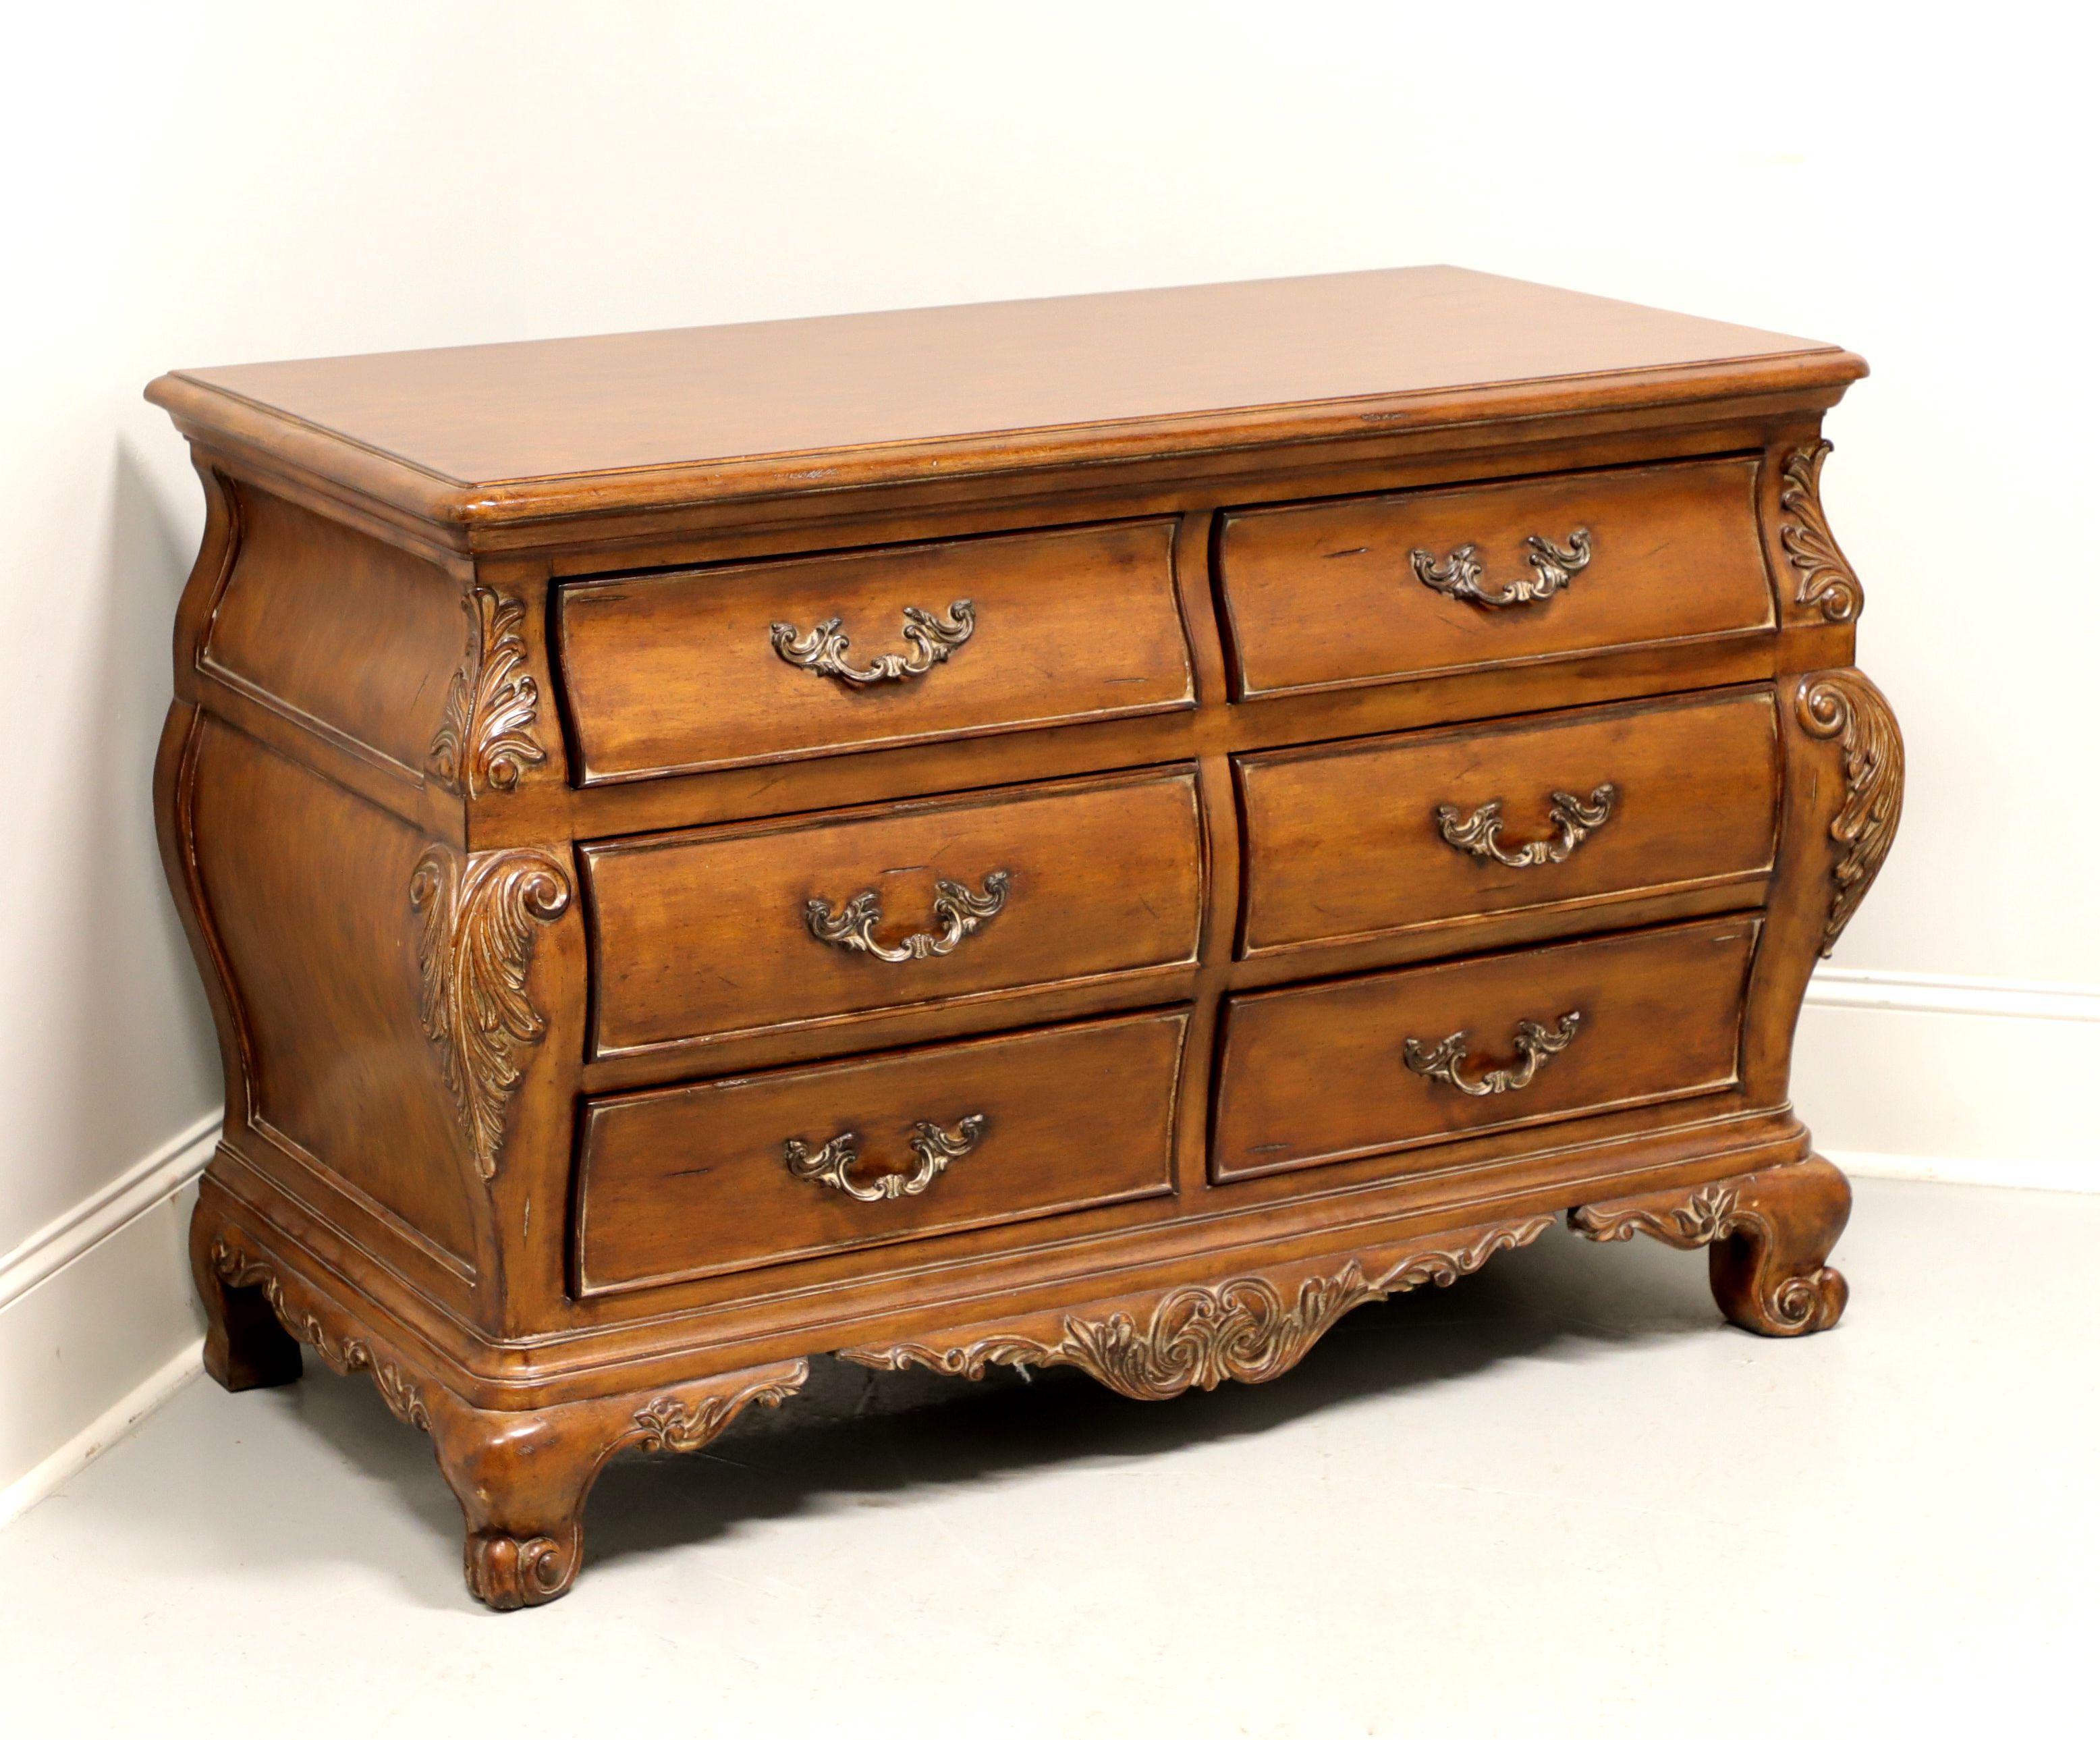 THOMASVILLE Chateau Provence French Country Double Dresser 3